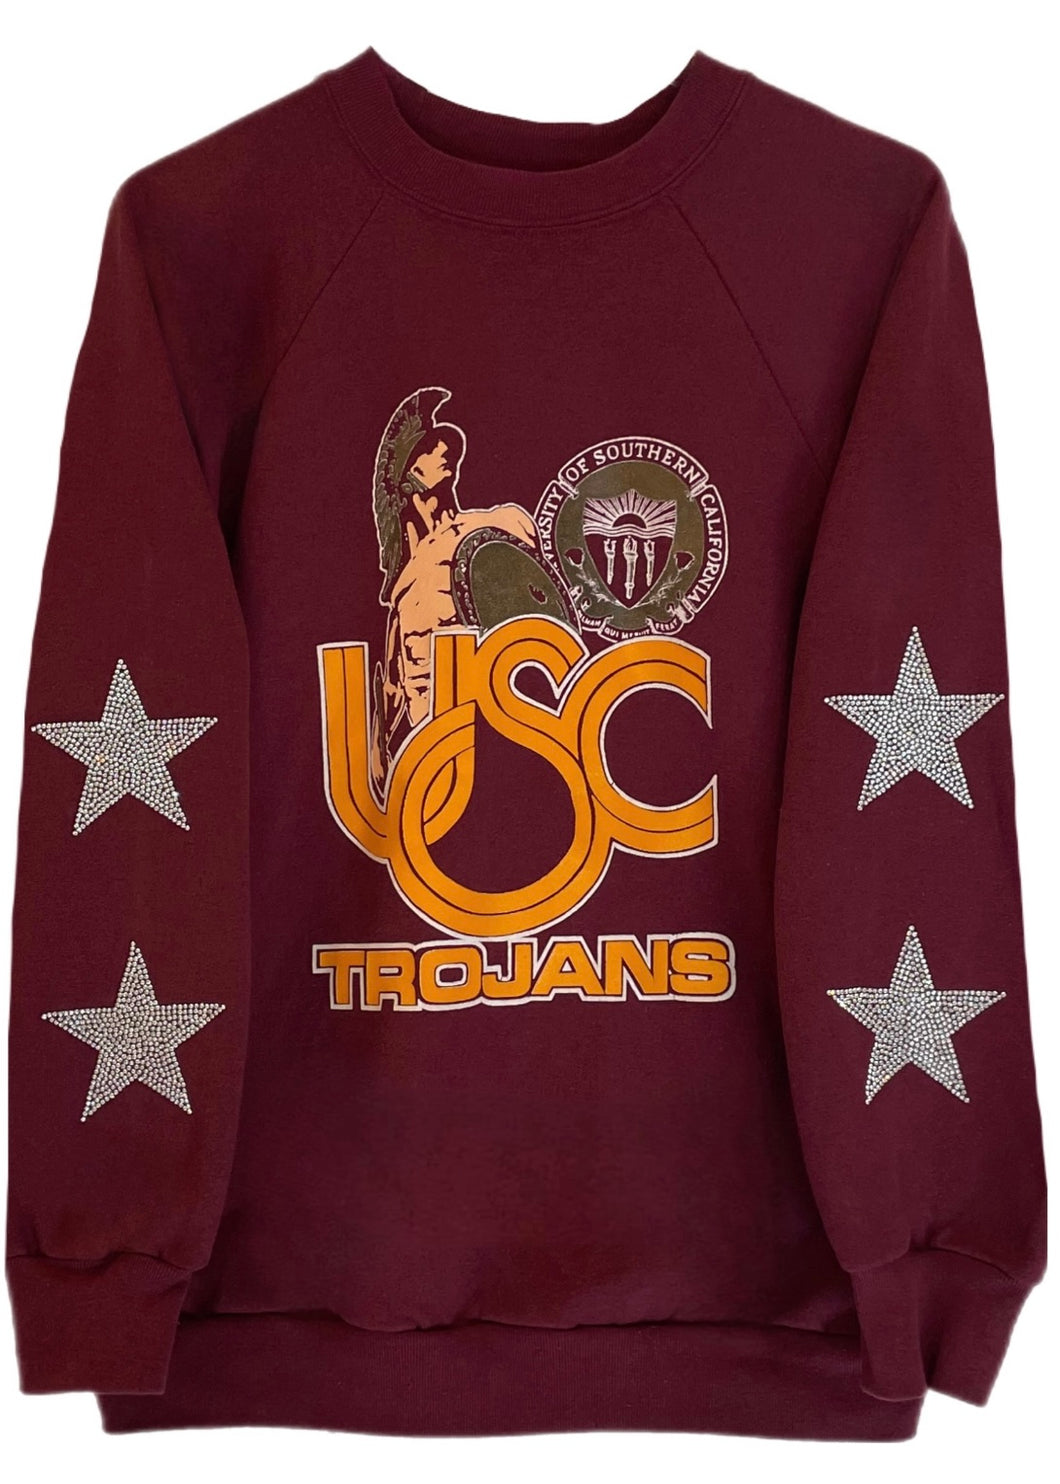 University of Southern California, USC One of a KIND Vintage Sweatshirt with Crystal Star Design.